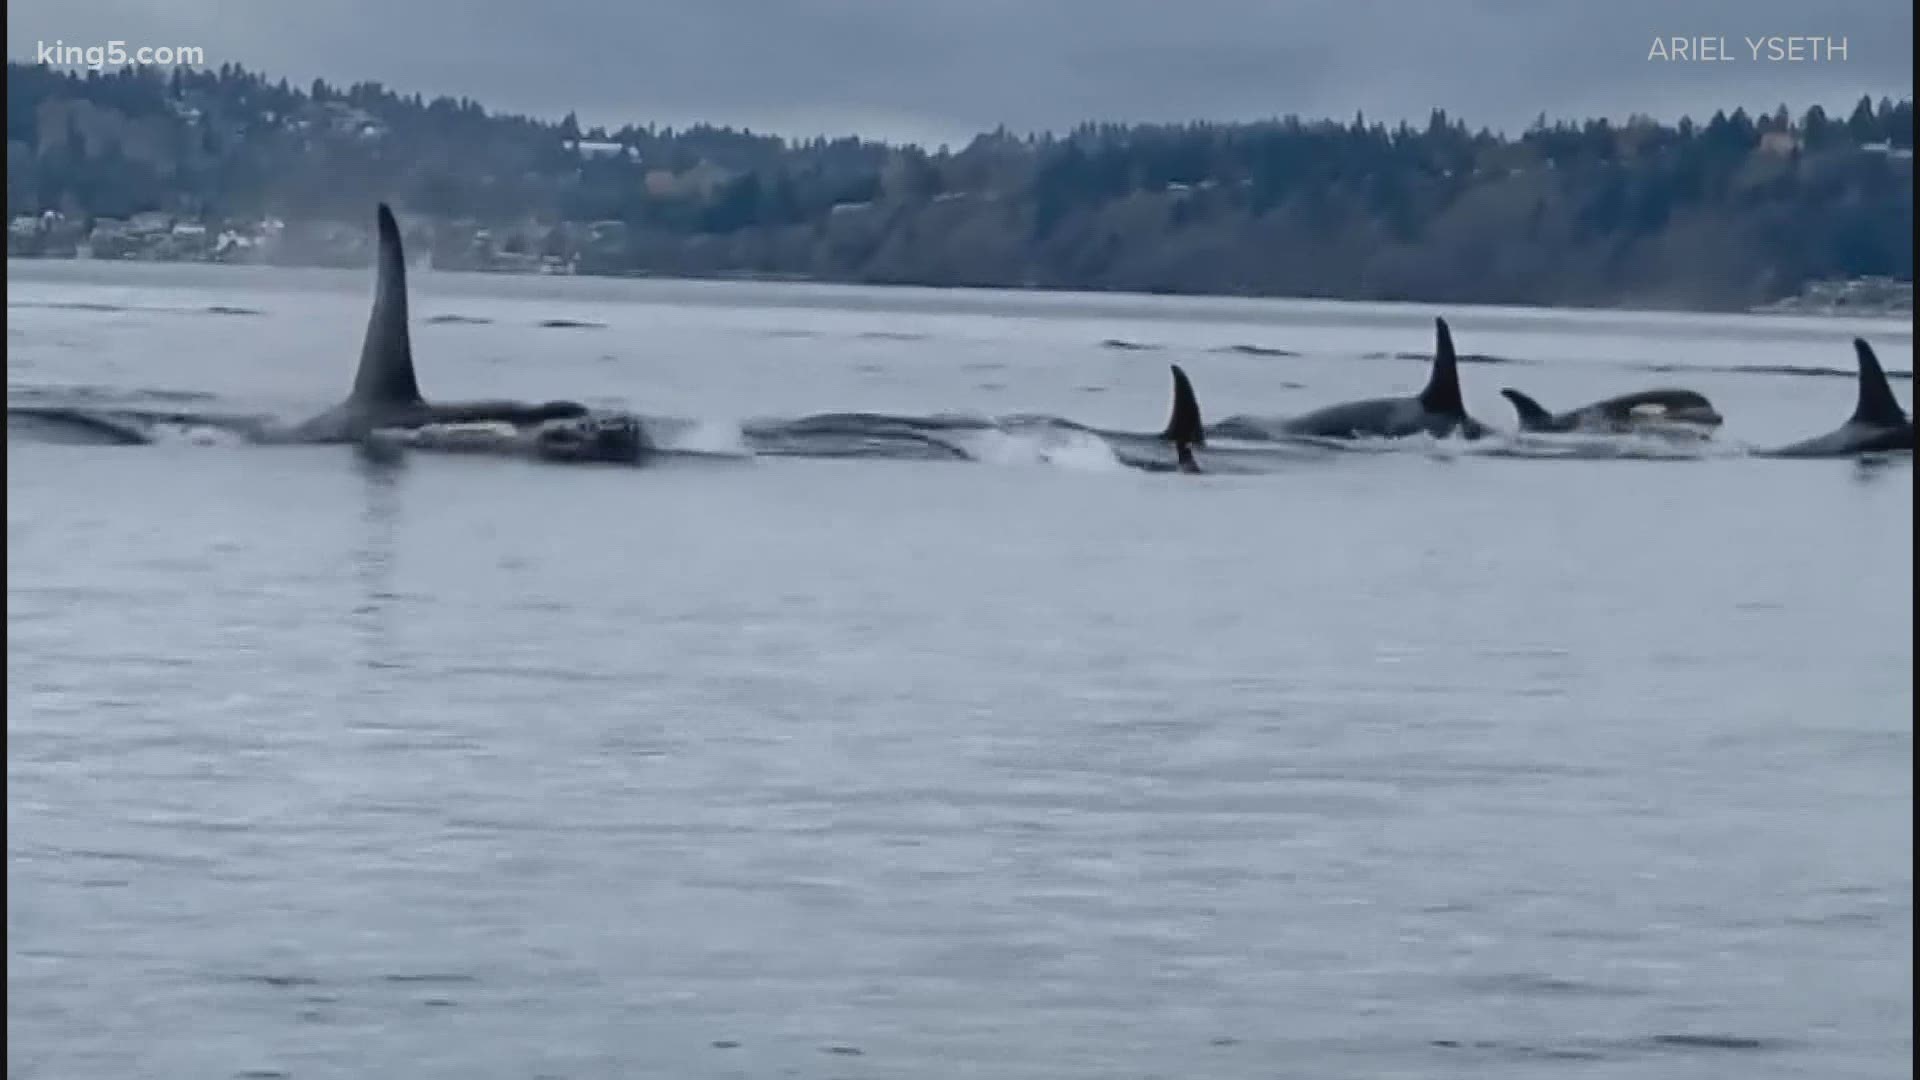 KING 5 viewer Ariel Yseth shared some incredible video of the Southern Resident orca J-pod swimming near Point Robinson on Saturday.